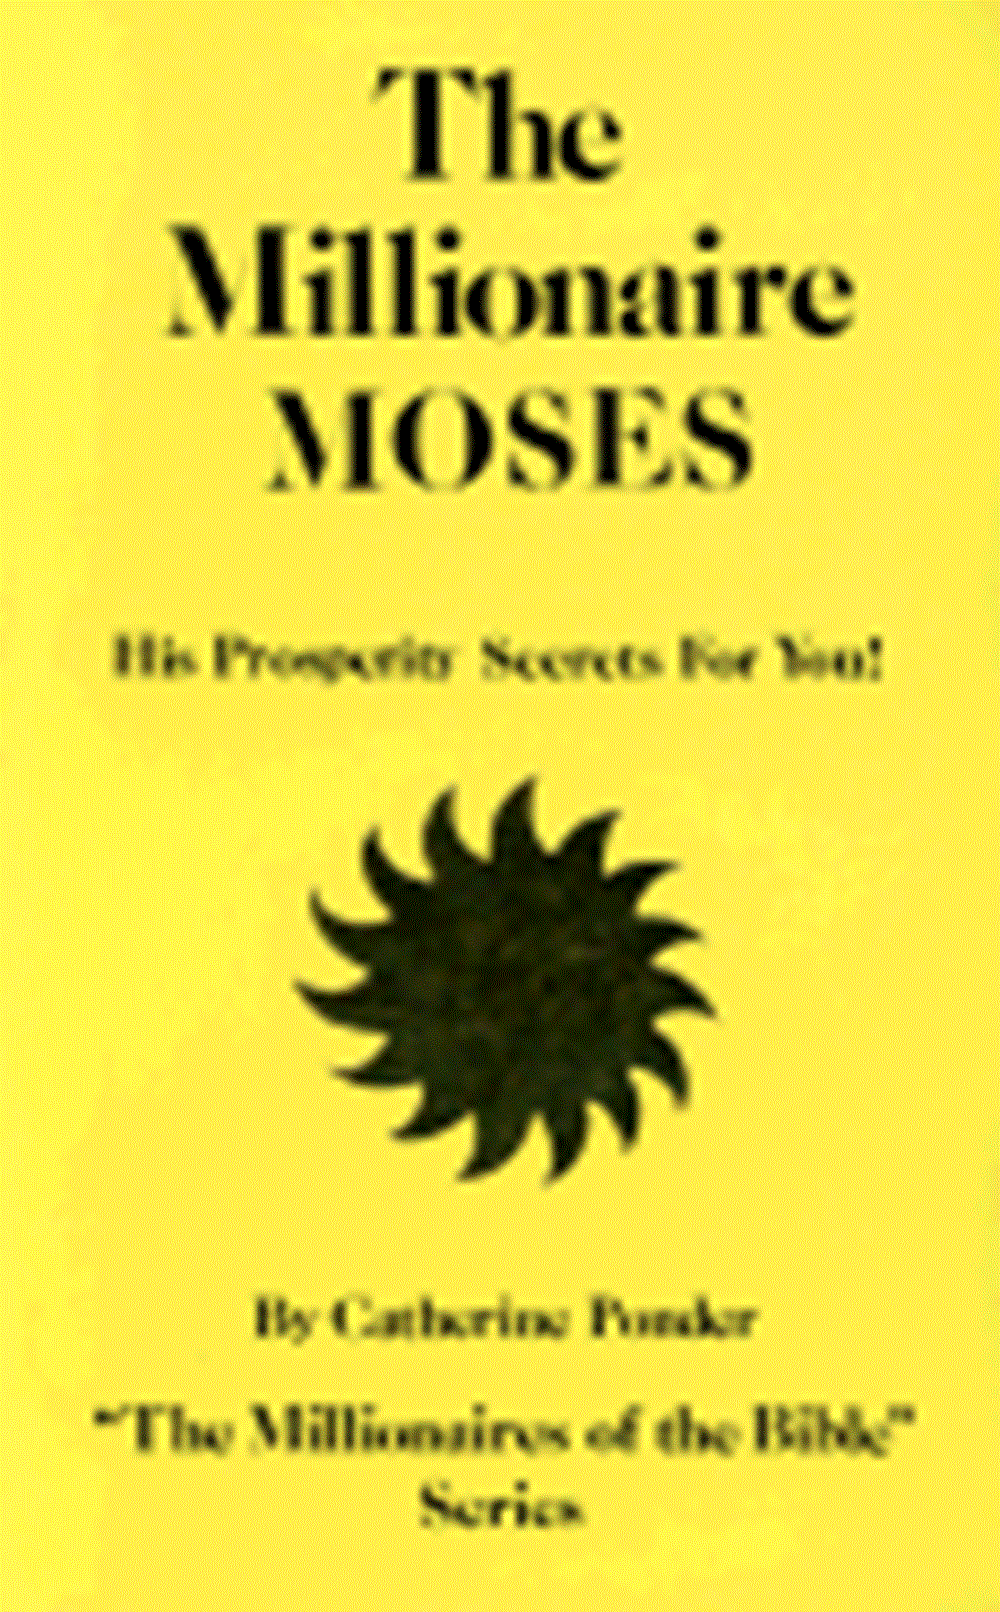 Millionaire Moses: His Prosperity Secrets for You! (Millionaires of the Bible Series) (Revised)